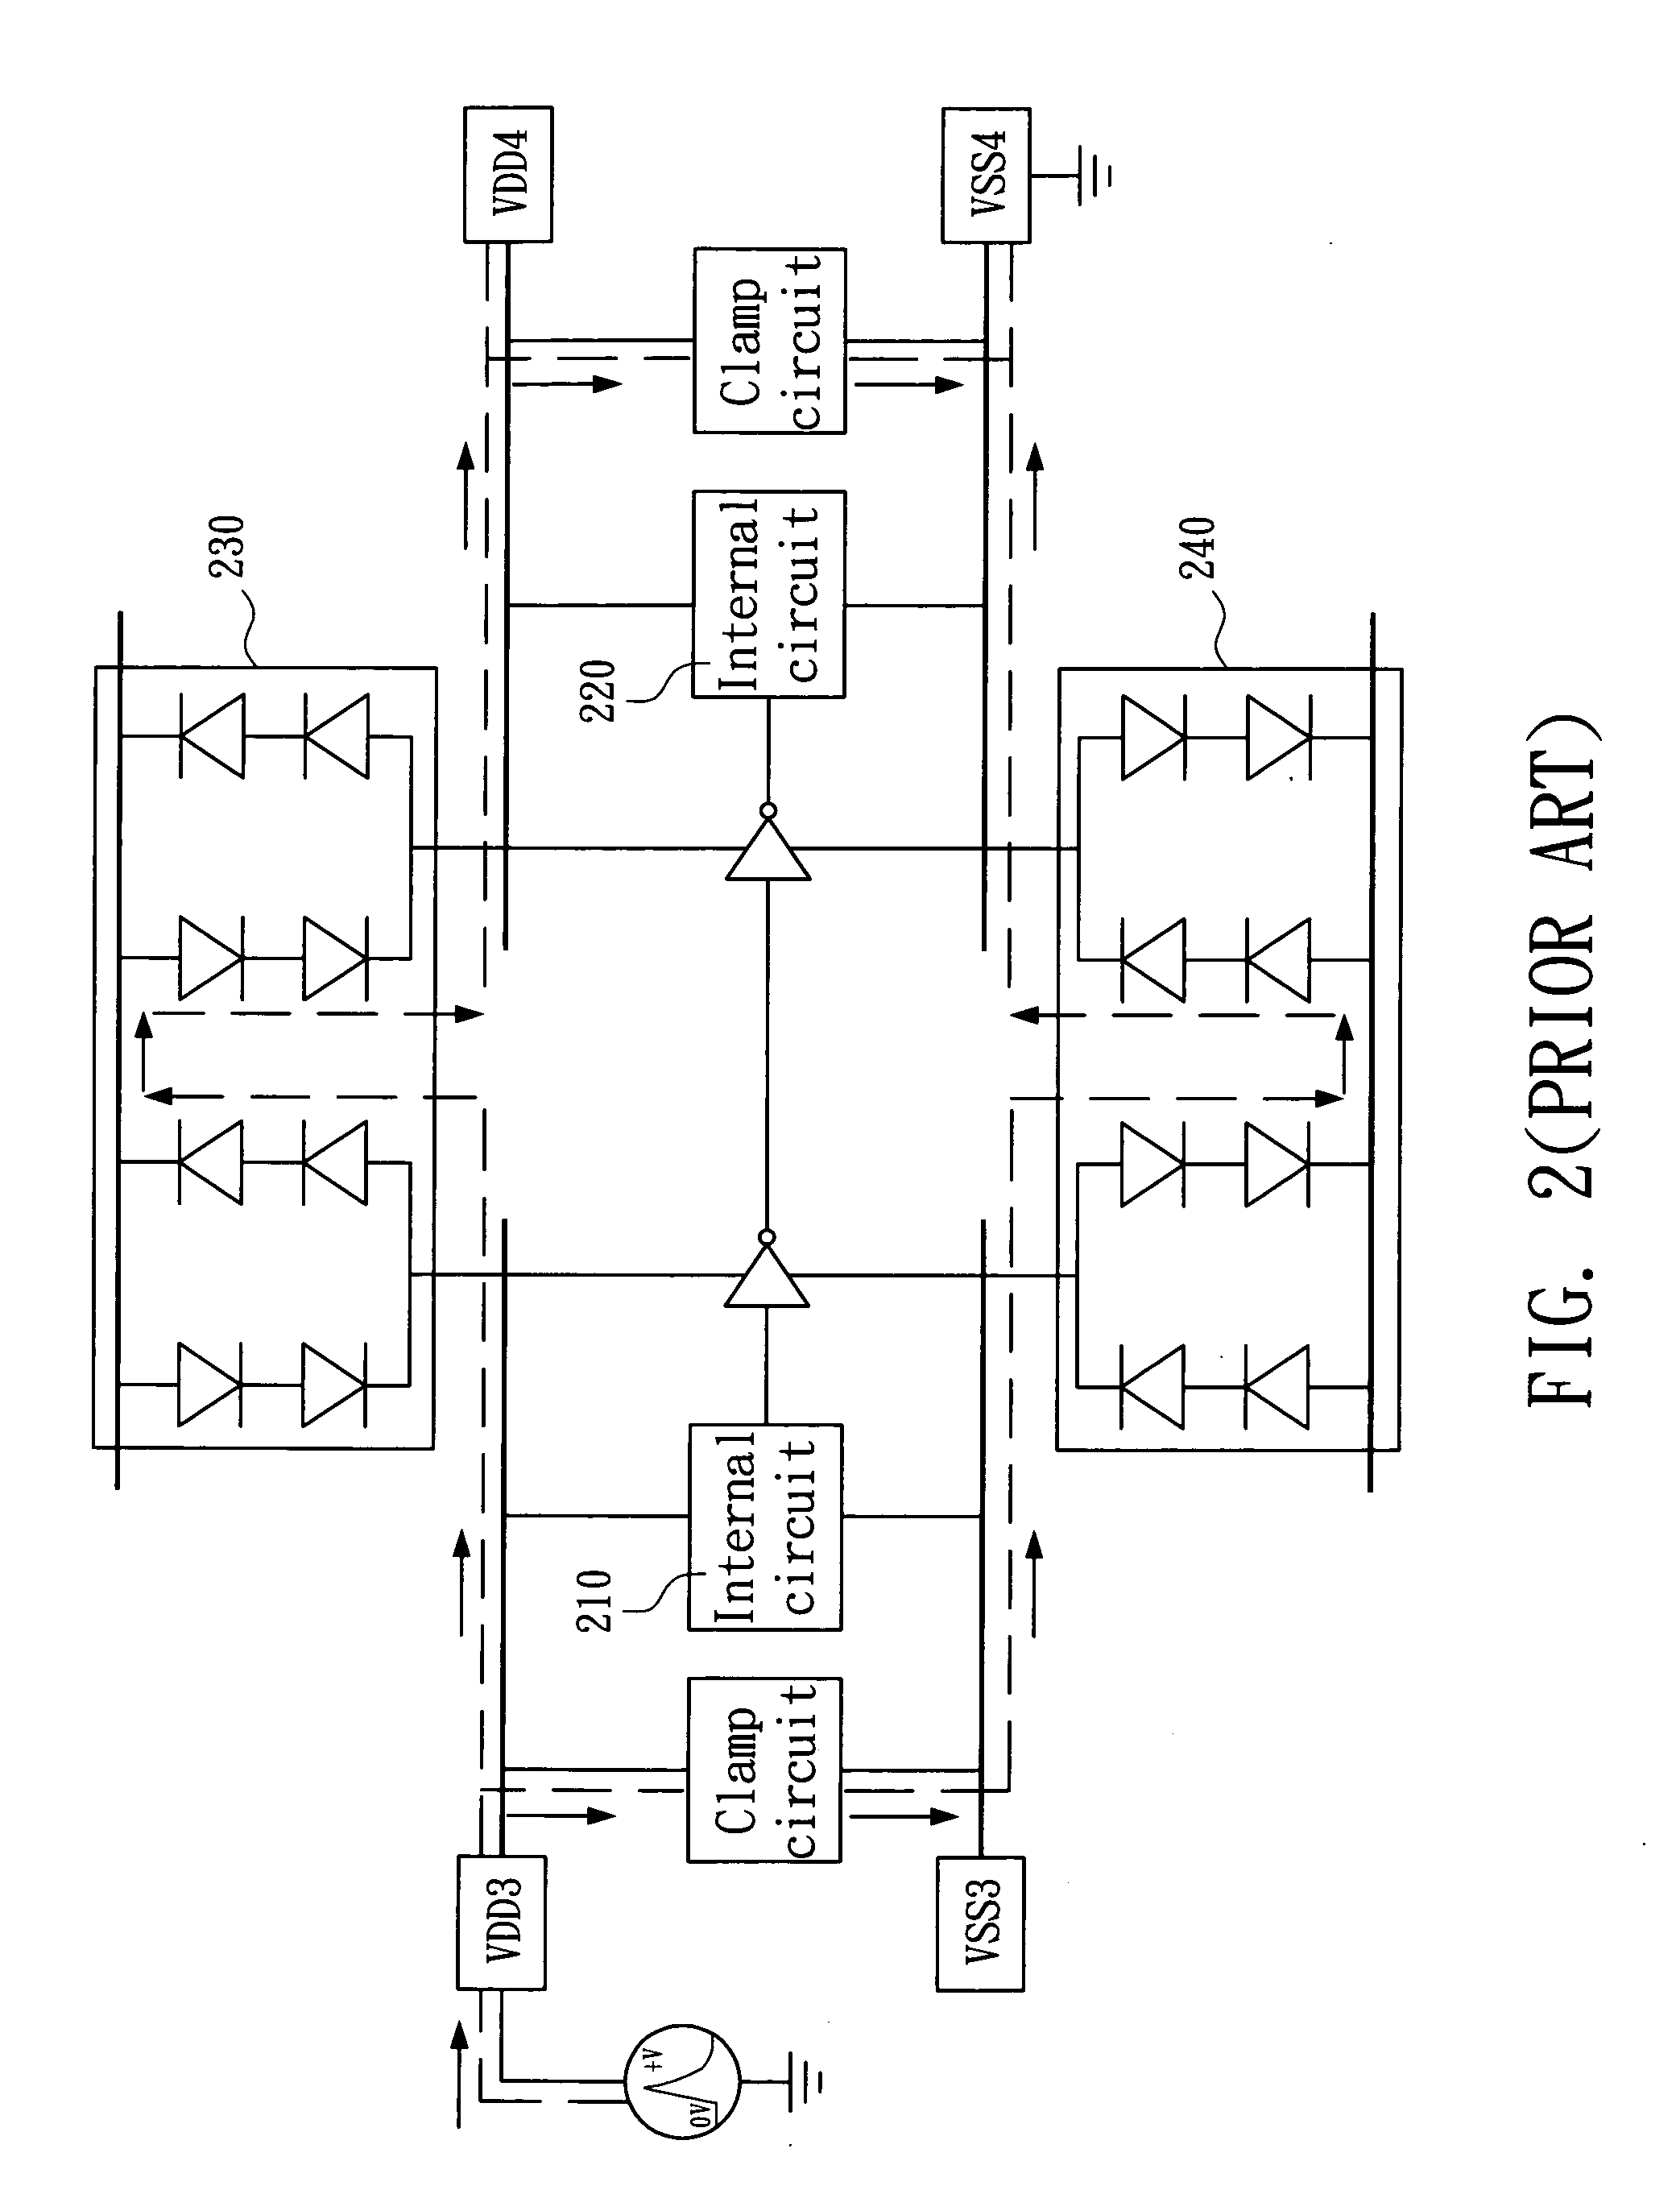 ESD protection circuit between different voltage sources